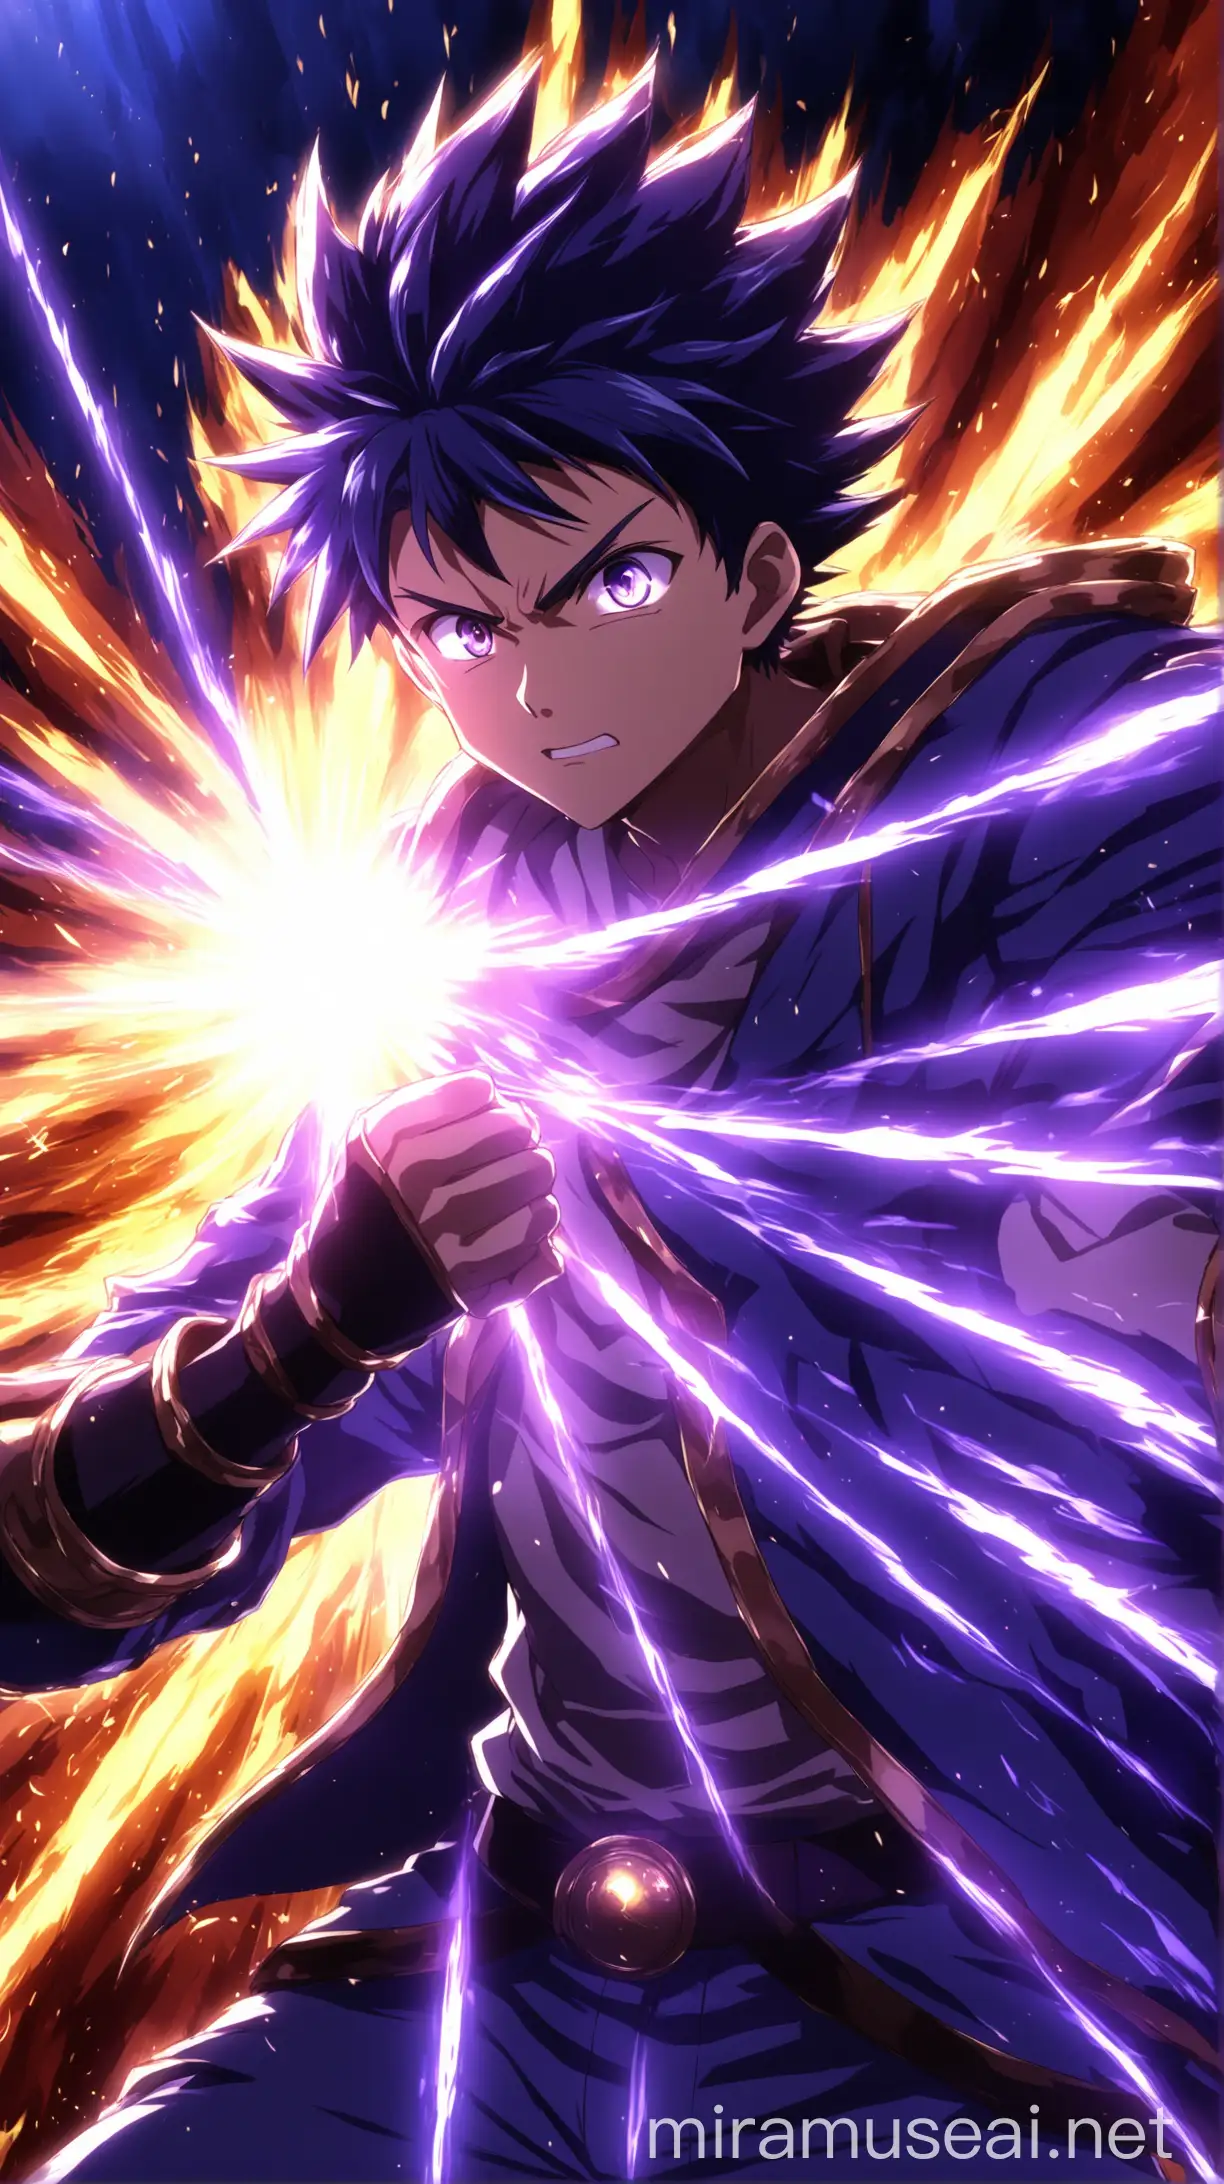 Anime Boy in Intense FaceOff with Brilliant Light Background